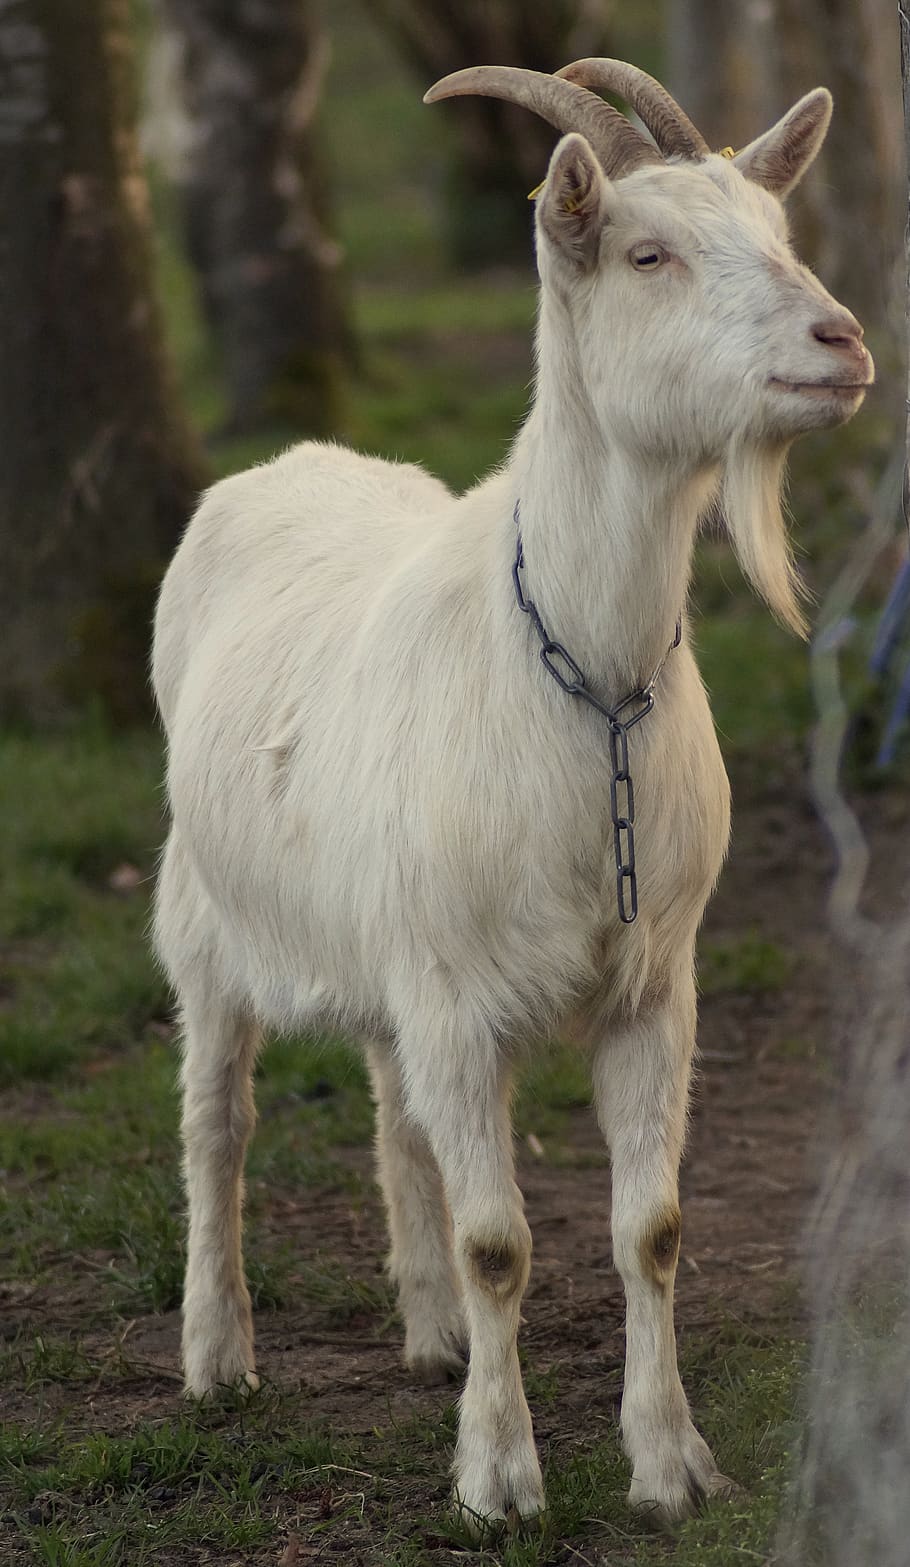 billy goat, bock, goatee, horns, livestock, goat buck, farm, curious, domestic goat, agriculture